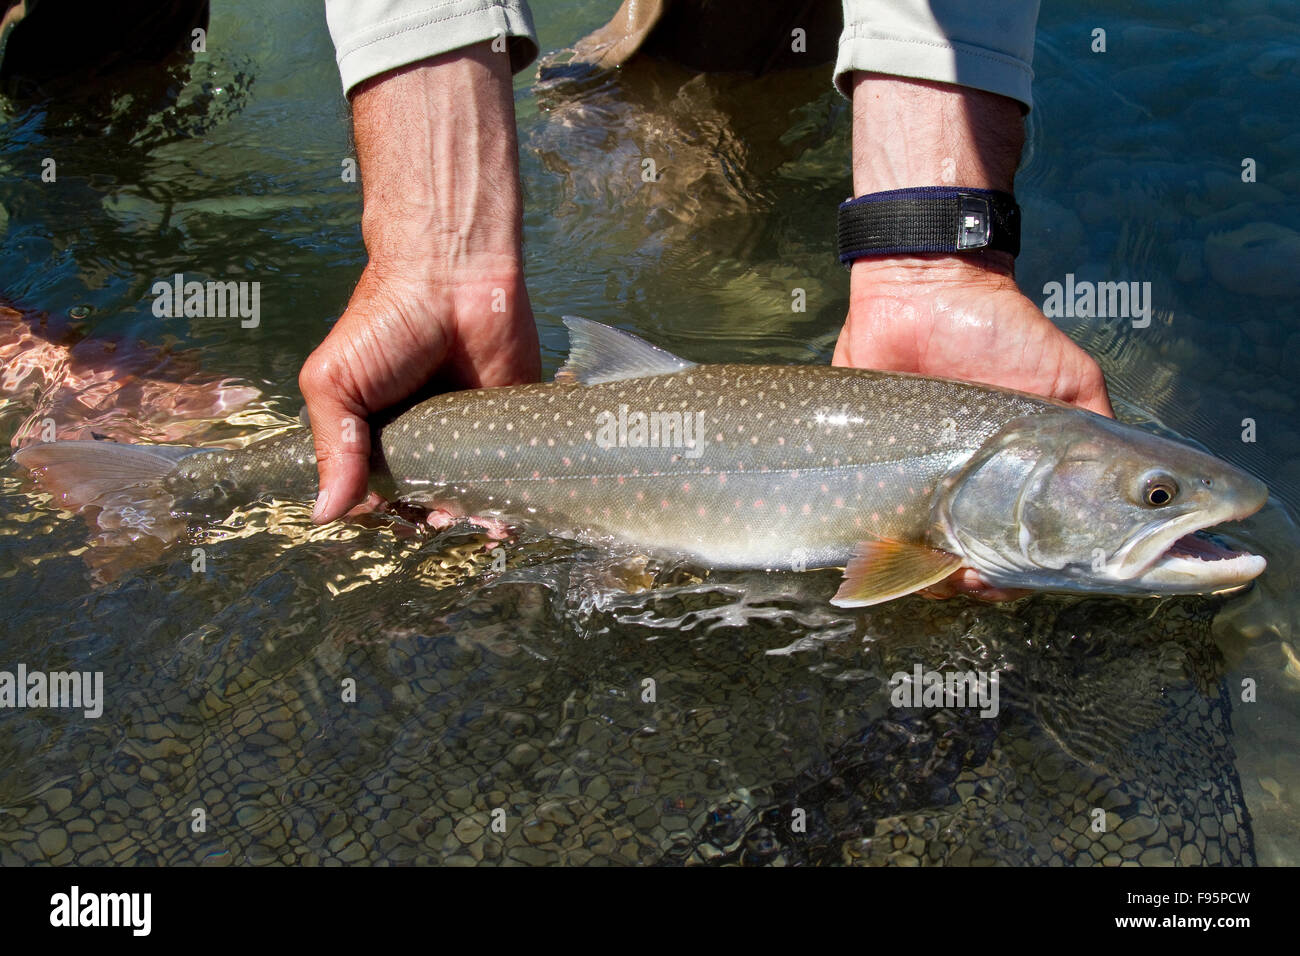 Fishing guide releases bull trout into Kootenay river, East Kootenays, BC, Canada. Stock Photo